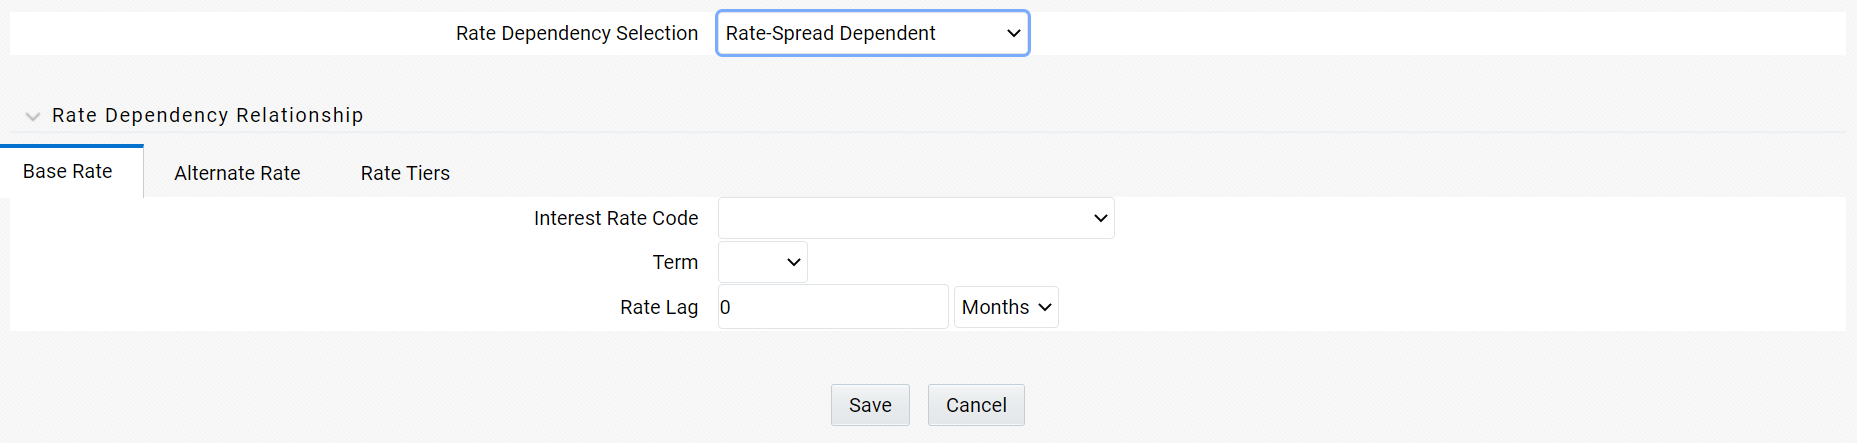 Base Rate Tab of the Rate Dependency Pattern Rule after selecting Rate-Spread Dependent option